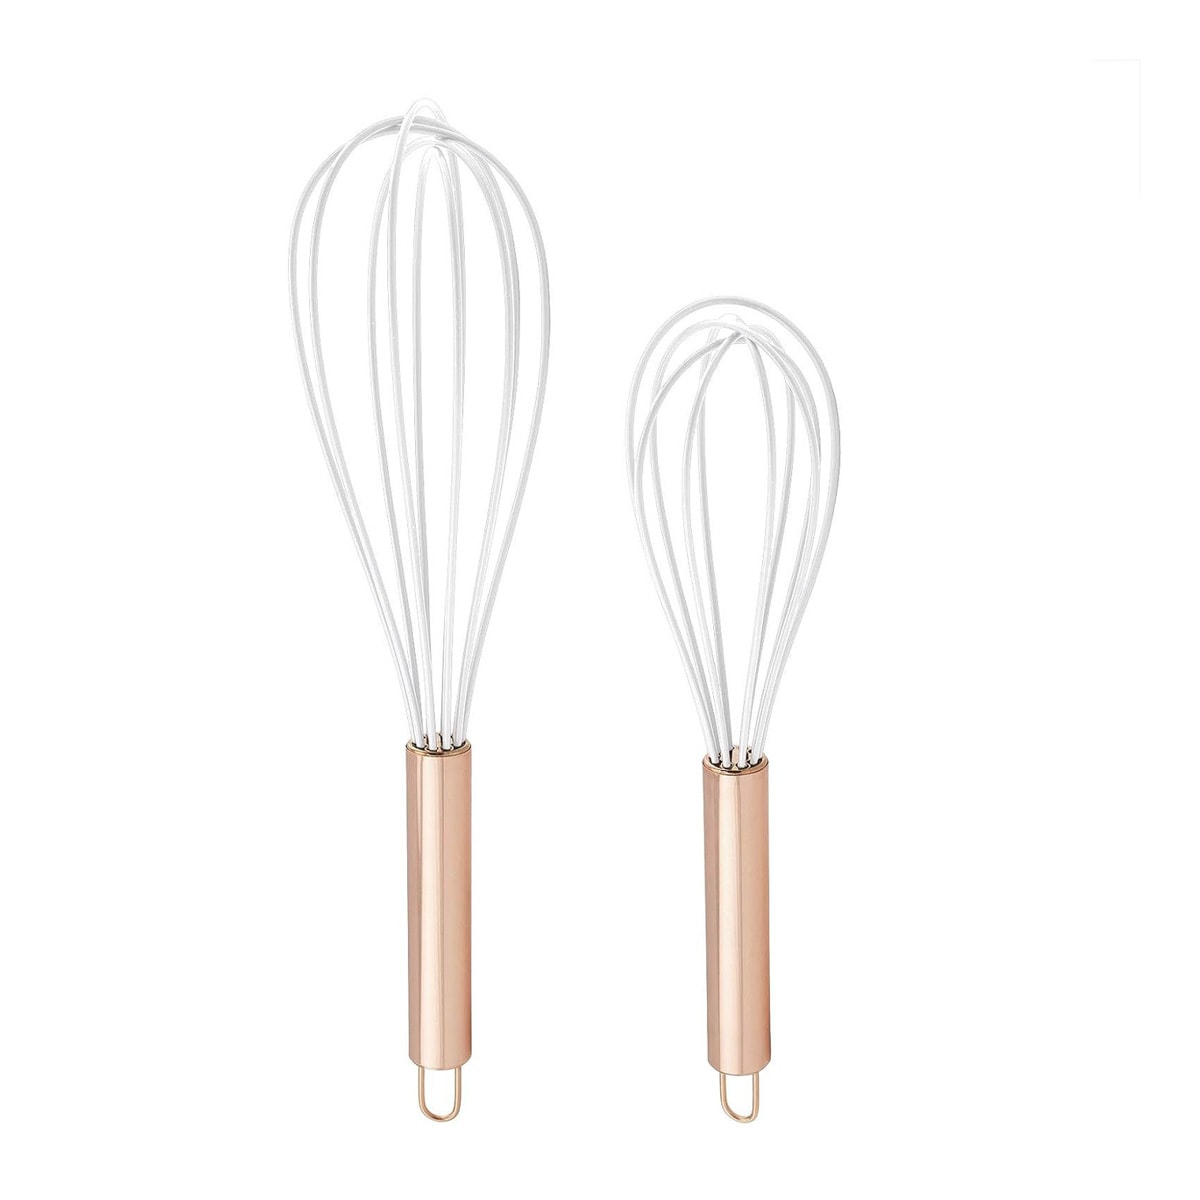 Stainless steel wire whisks.